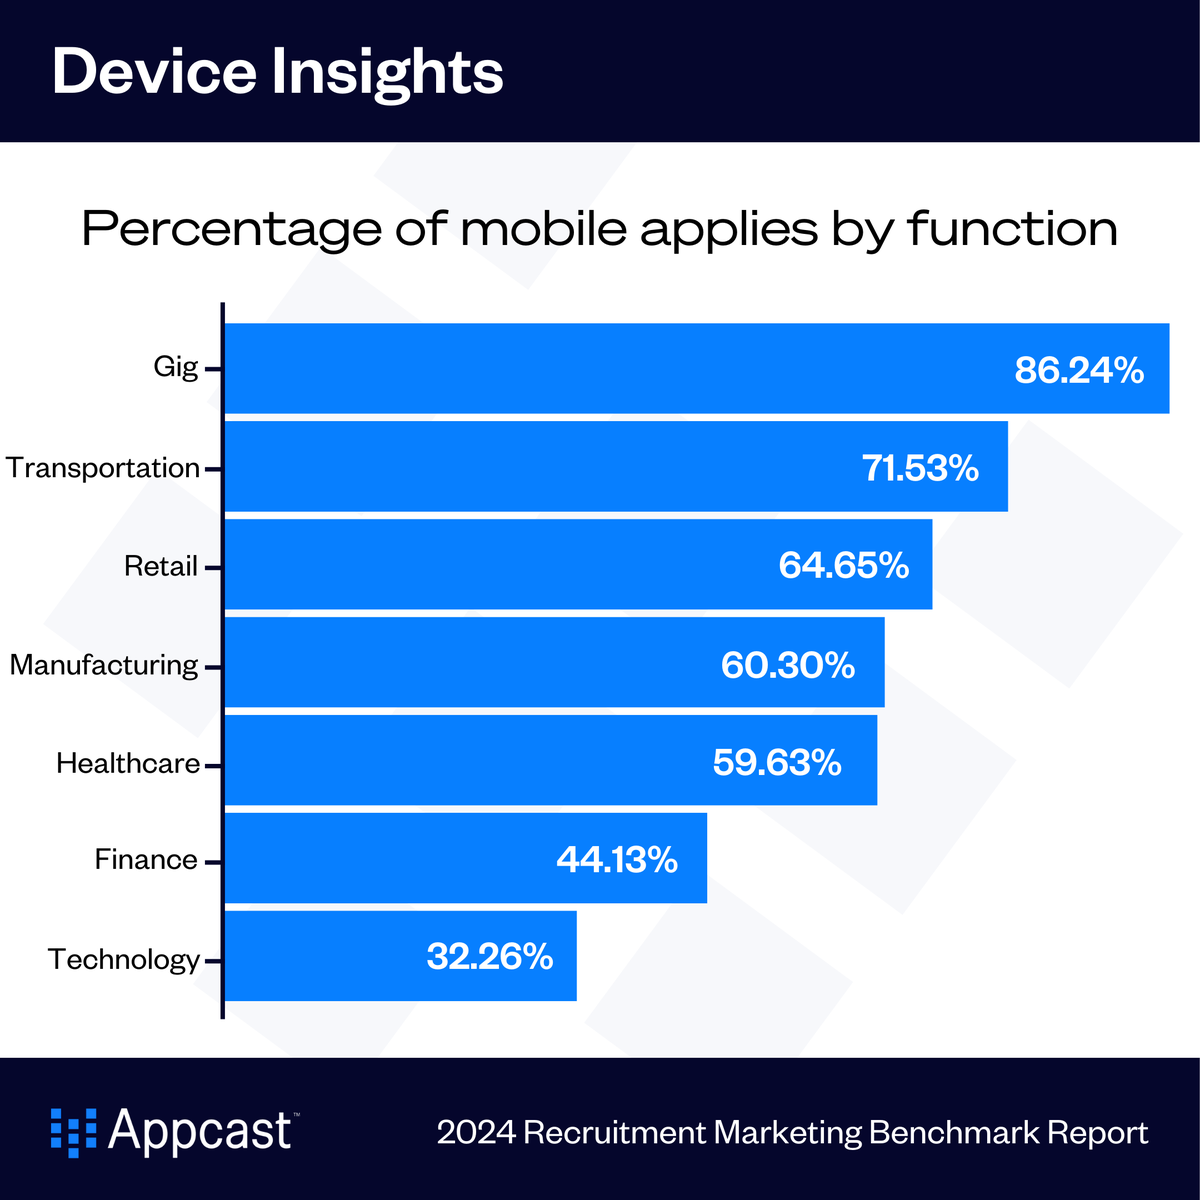 For the most classic “desk jobs,” like technology, nearly one-third of applications are completed on mobile. Why is that? Download our 2024 Recruitment Marketing Benchmark Report to learn more! ➡️ hubs.li/Q02l5BWK0